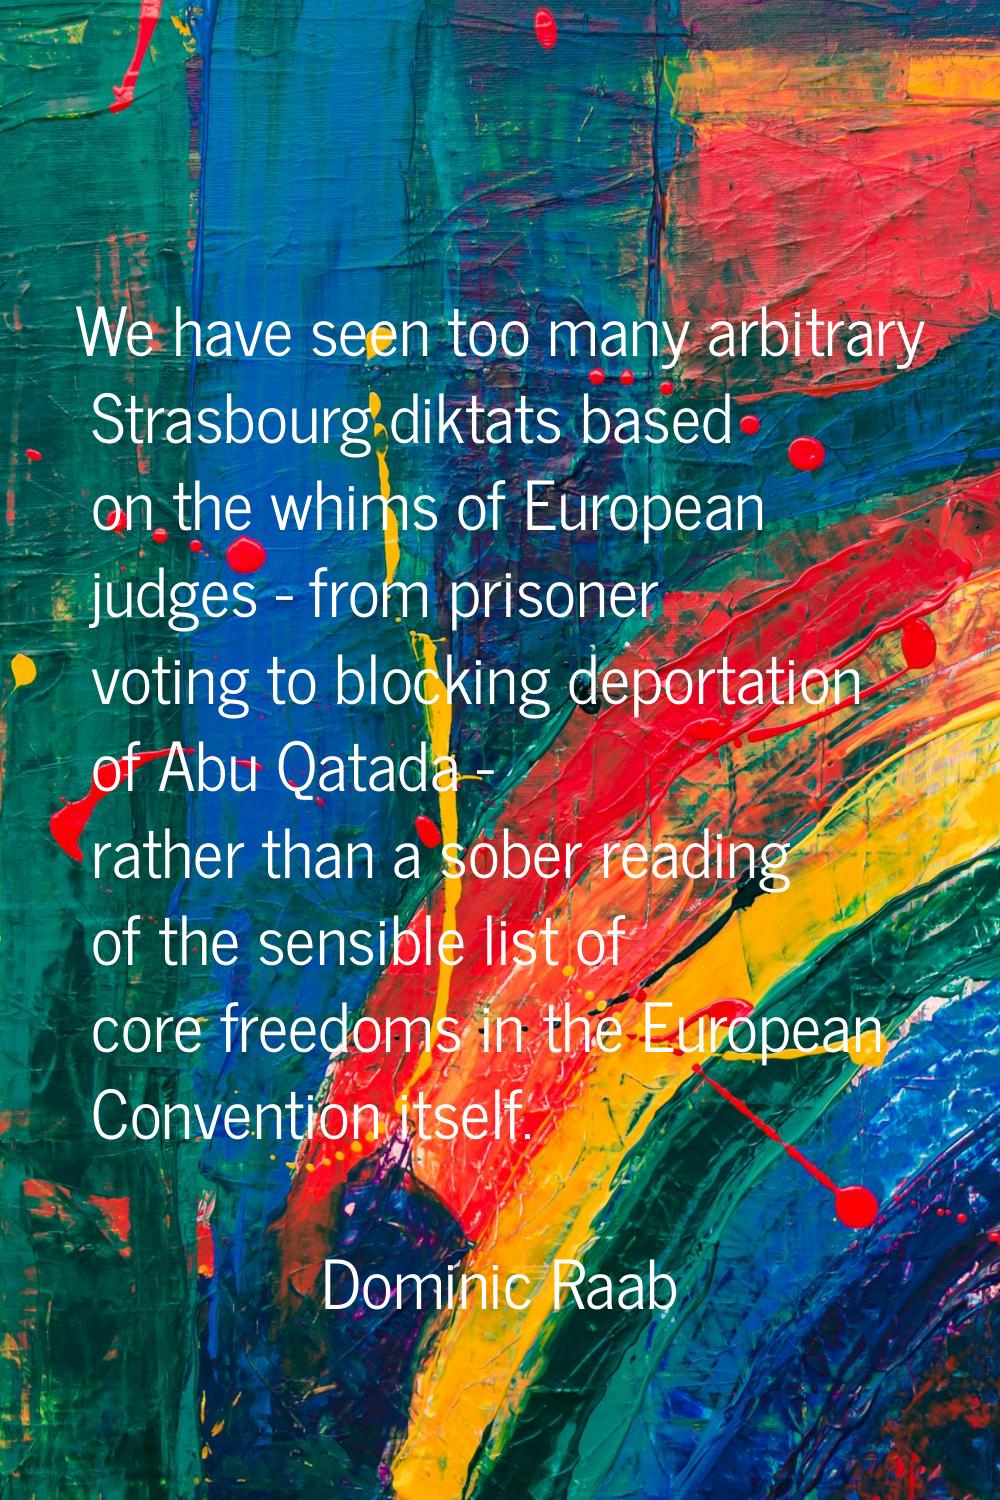 We have seen too many arbitrary Strasbourg diktats based on the whims of European judges - from pri